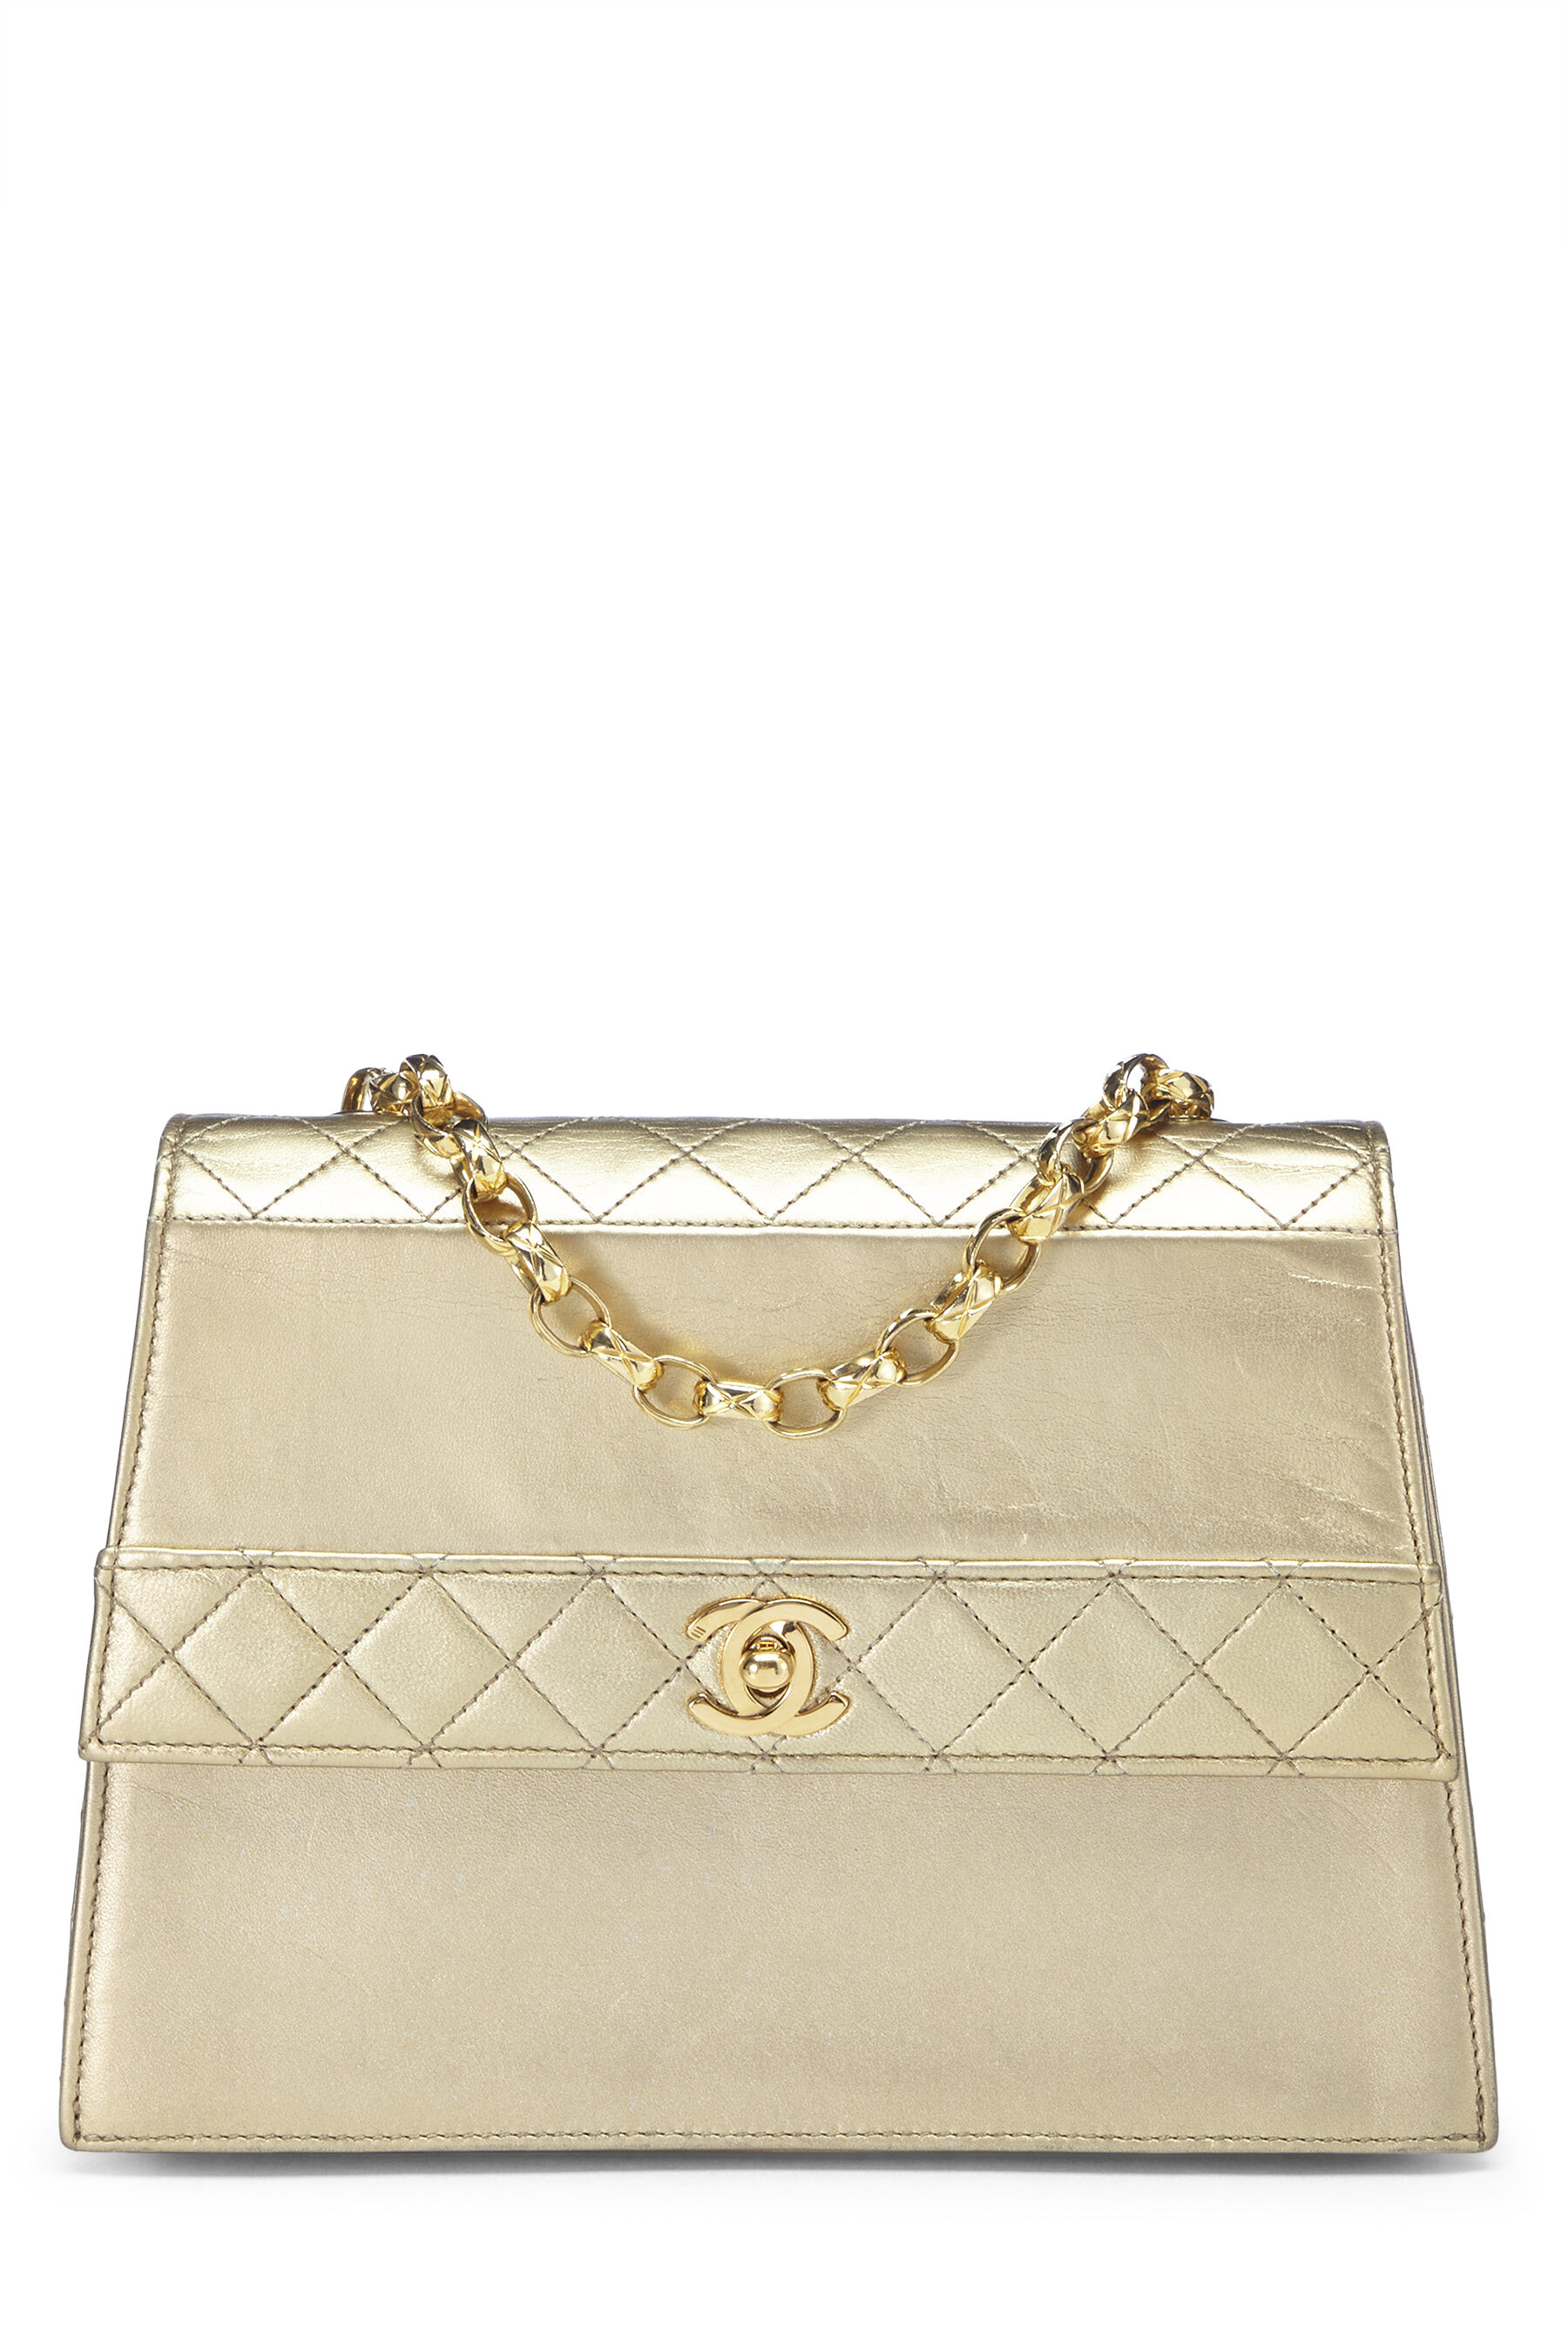 Extremely Rare Chanel Lambskin Trapezoid Bag – SFN